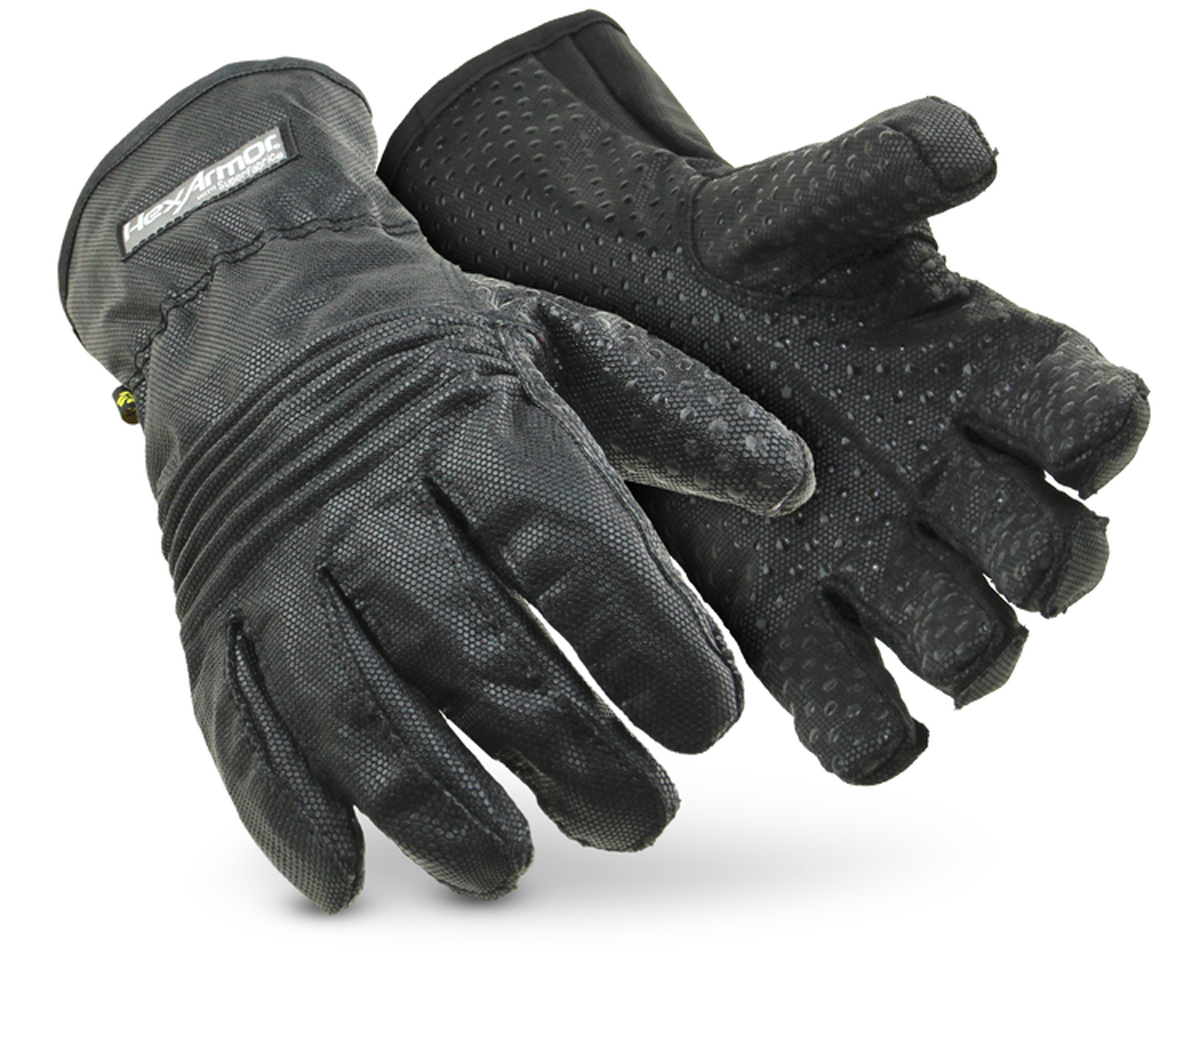 Airgas - B1399NFWPCP-11 - SHOWA™ Size 11 Heavy Duty Natural Rubber Palm Coated  Work Gloves With Cotton Liner And Gauntlet Cuff